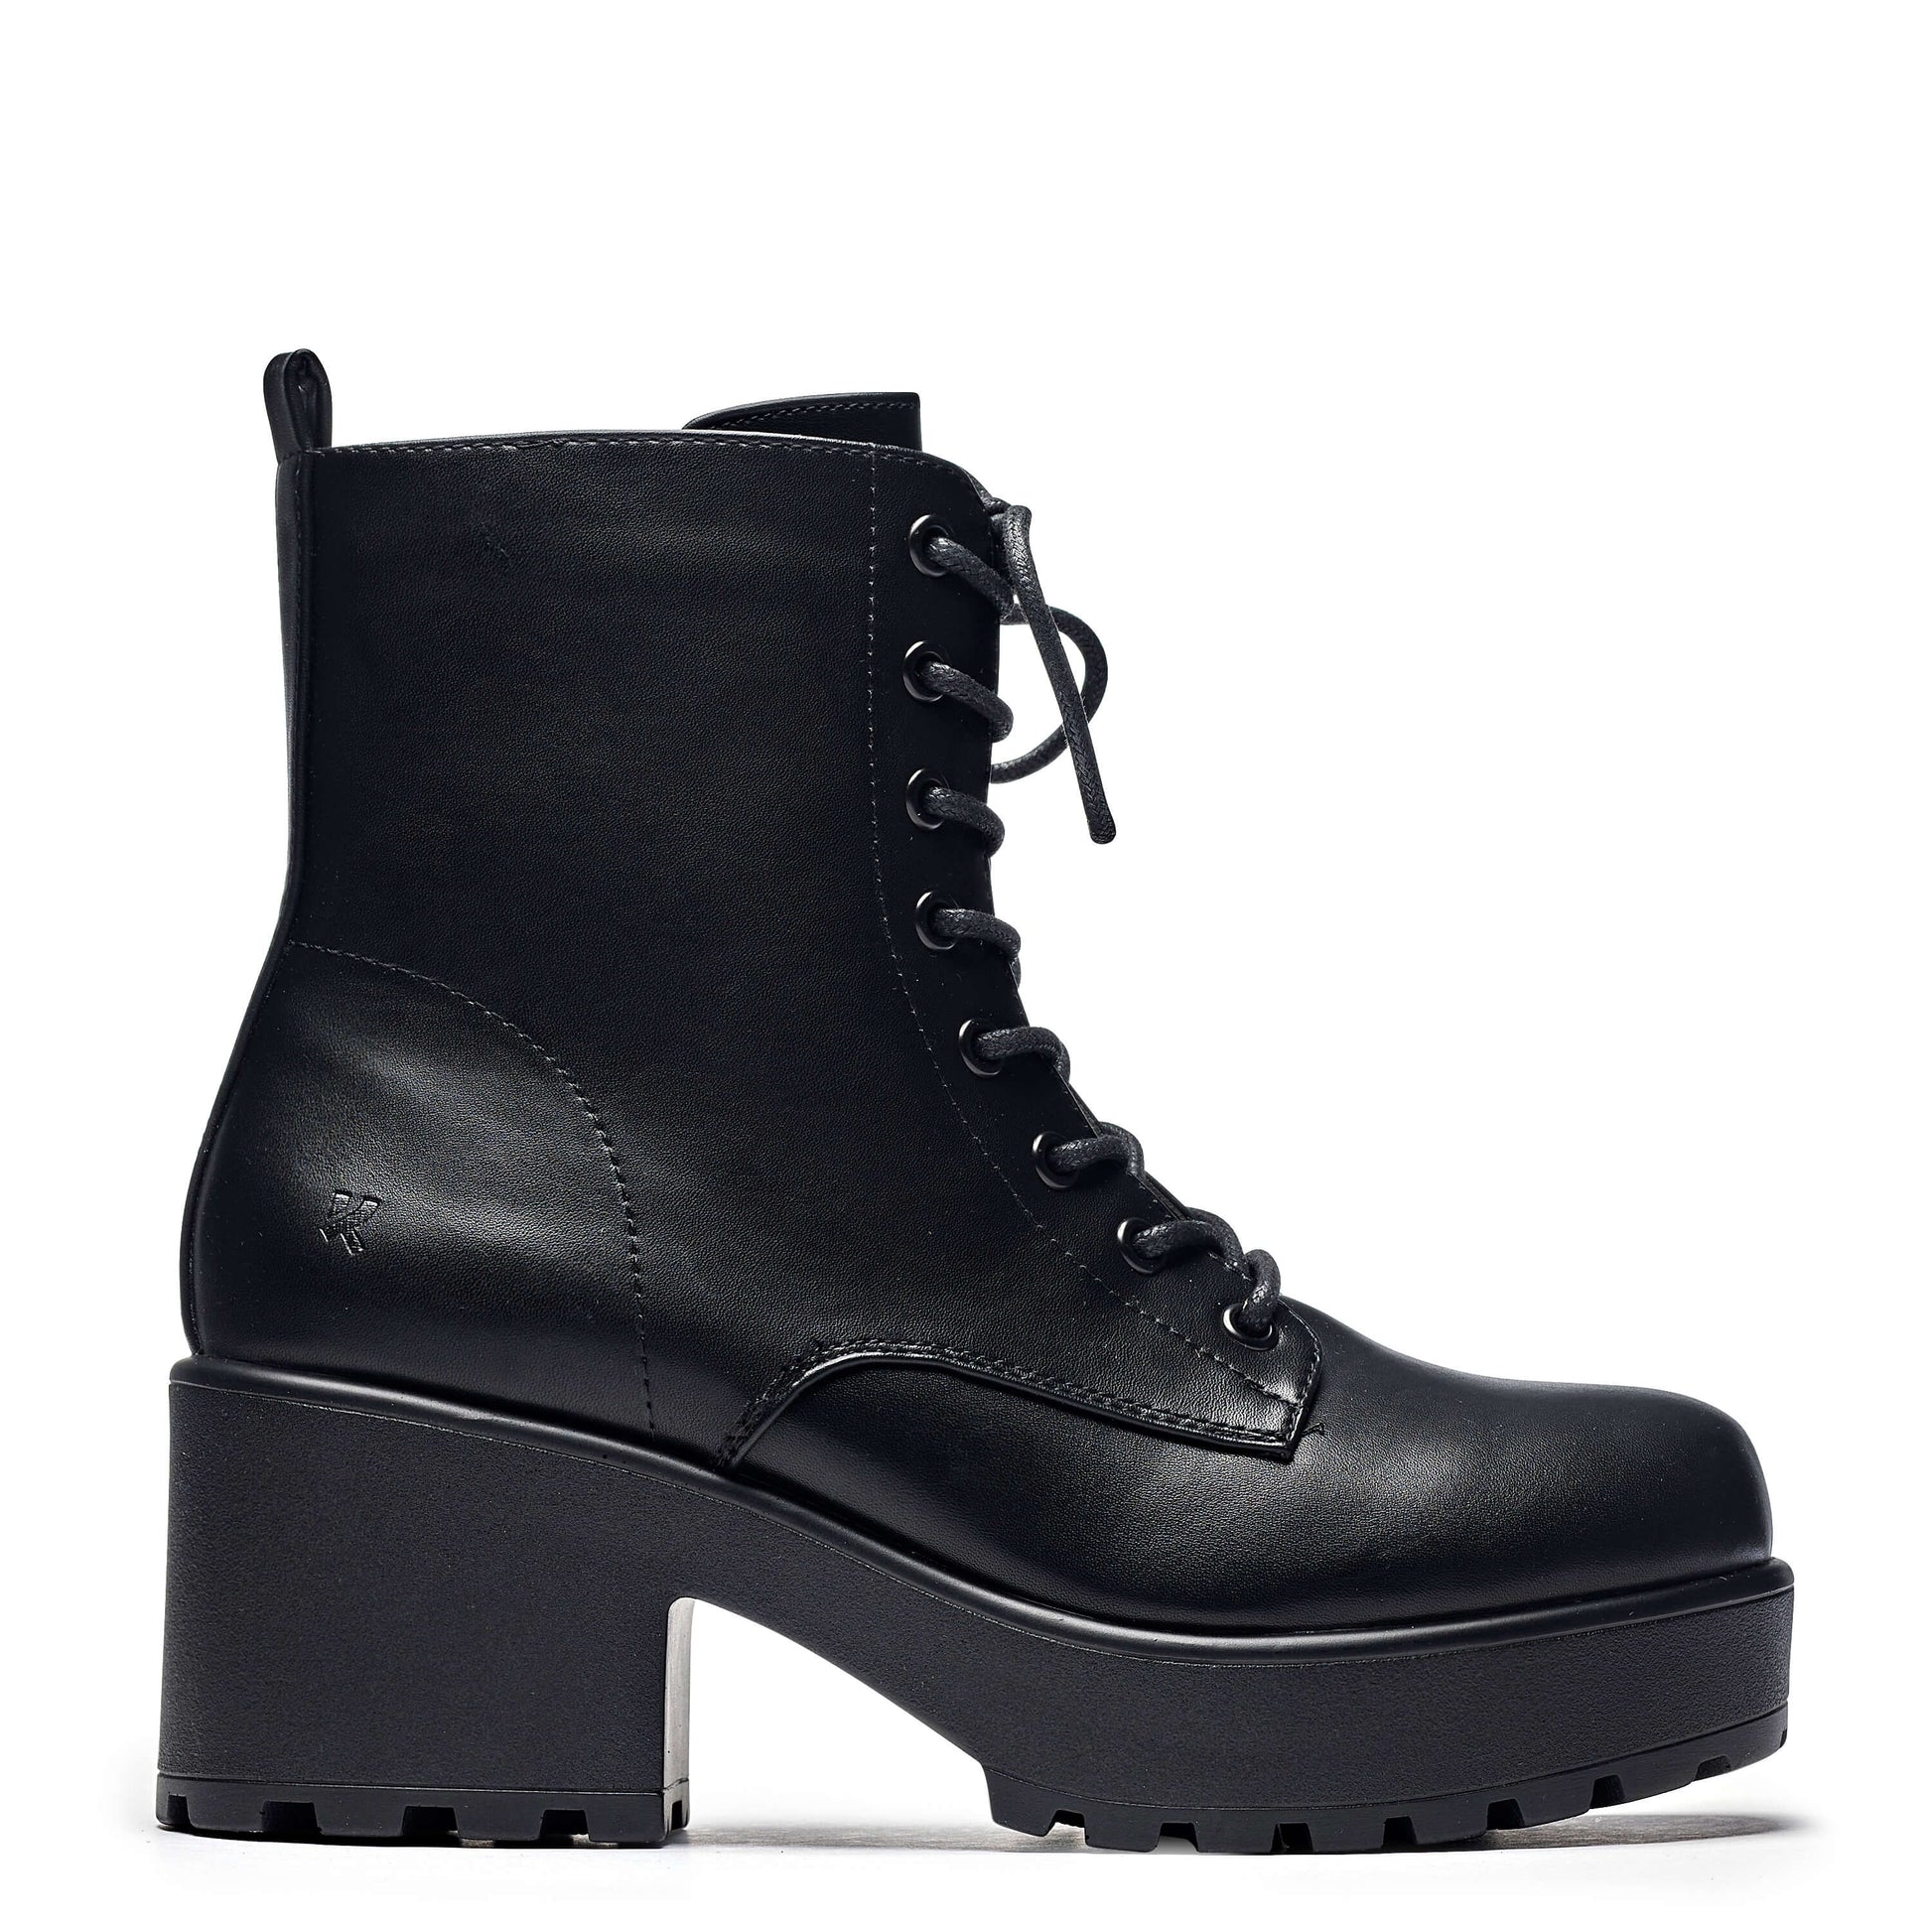 GIN Platform Military Boots - Ankle Boots - KOI Footwear - Black - Side View